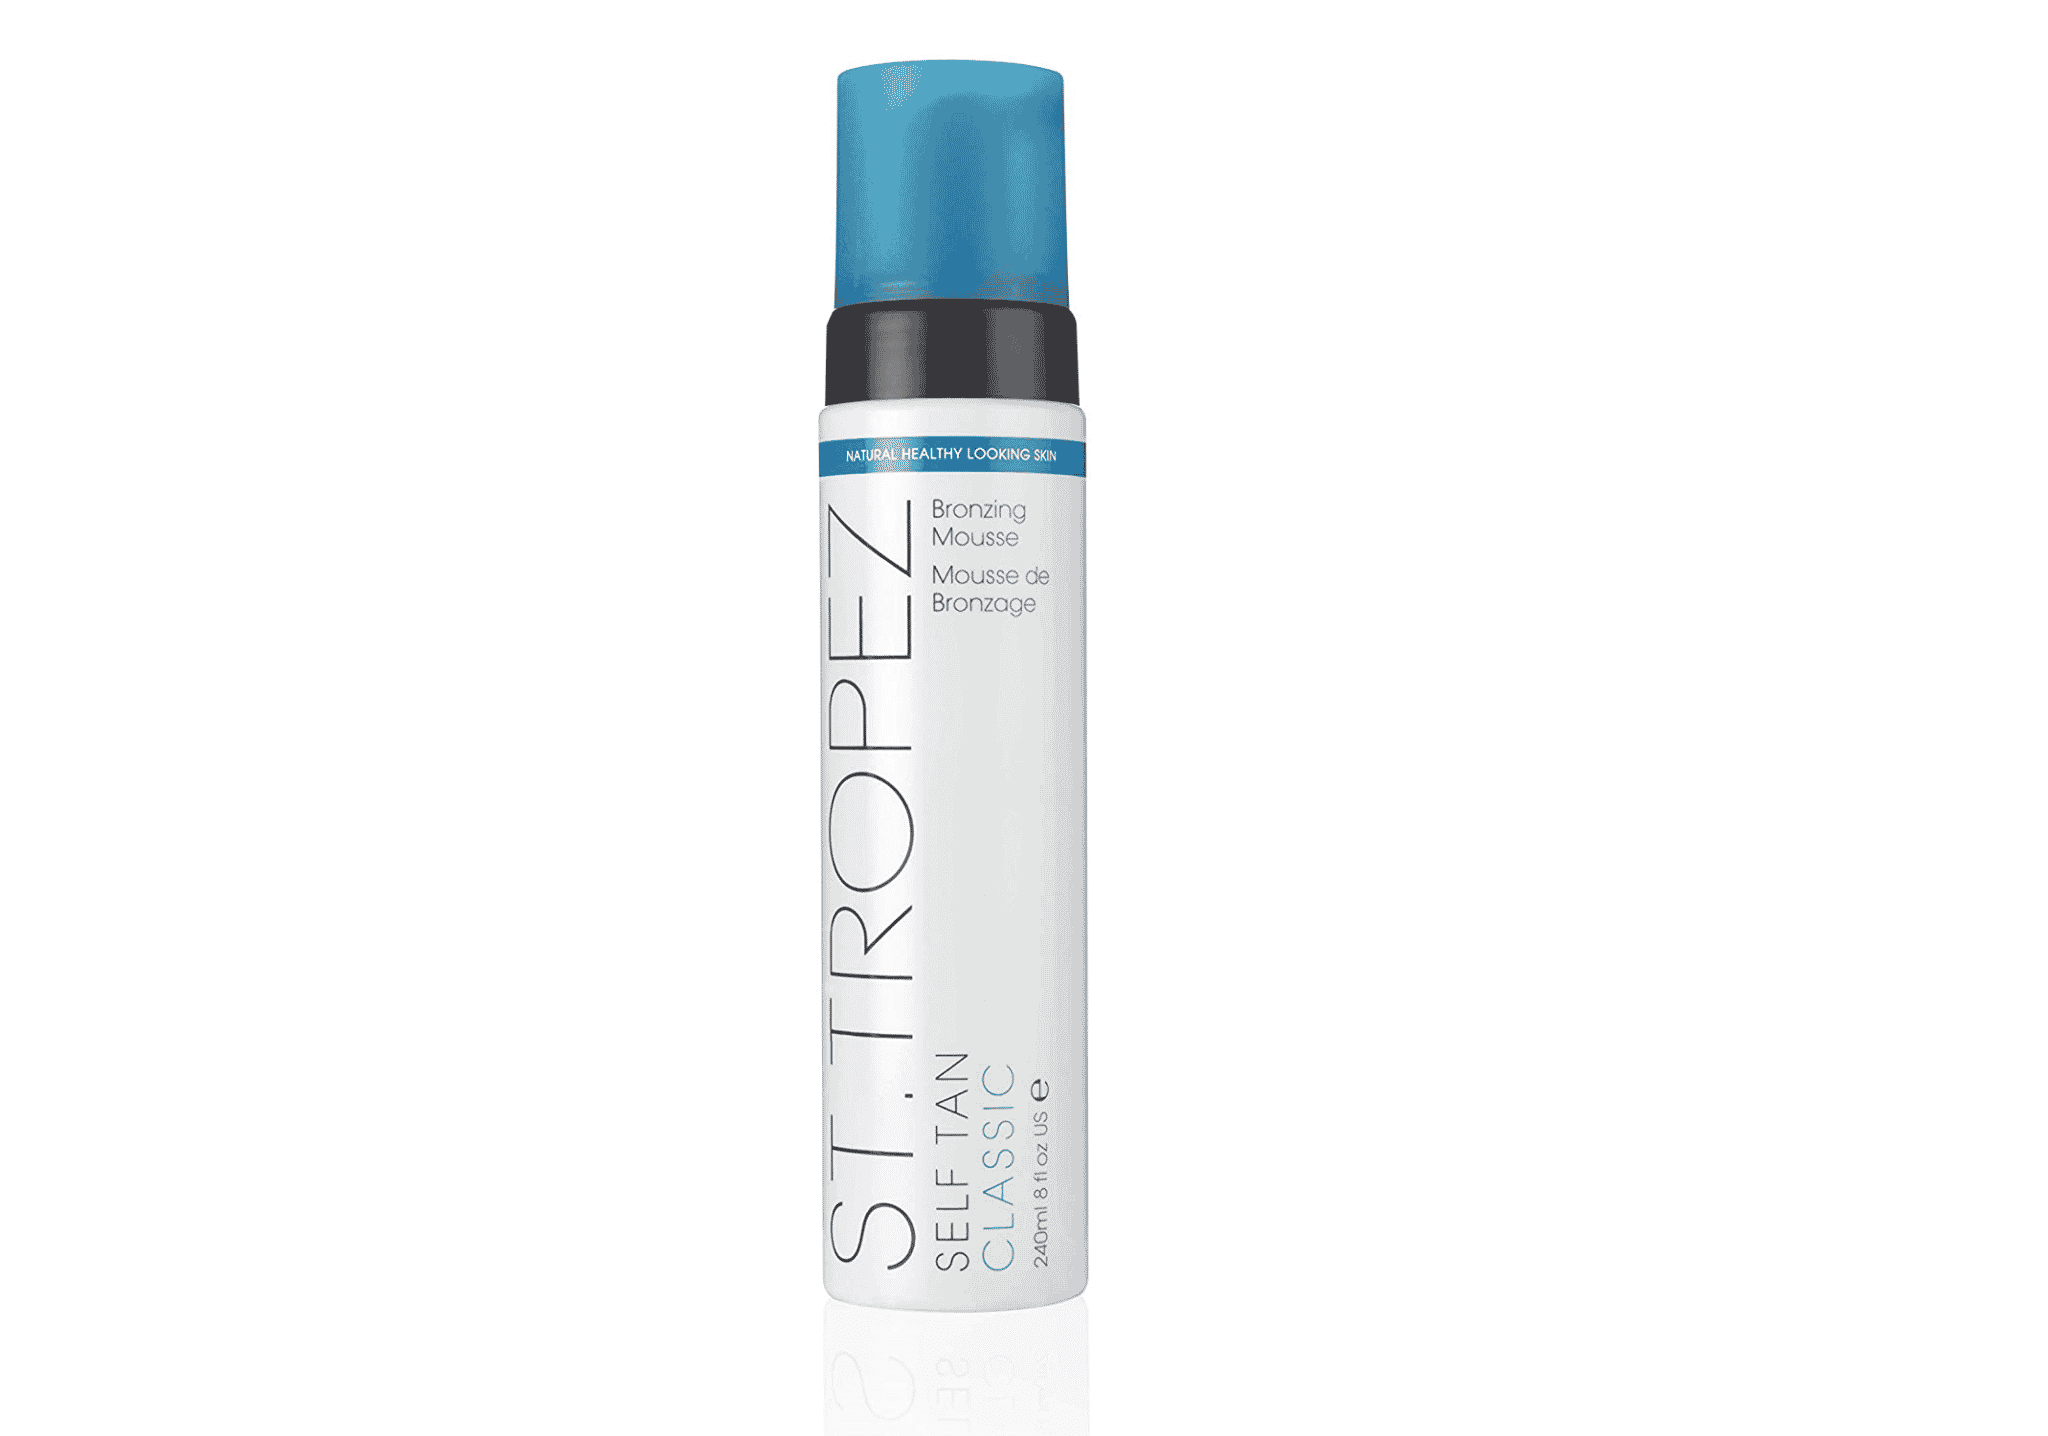 St. Tropez's Self Tan Classic Bronzing Mousse helps you get a natural glow. 